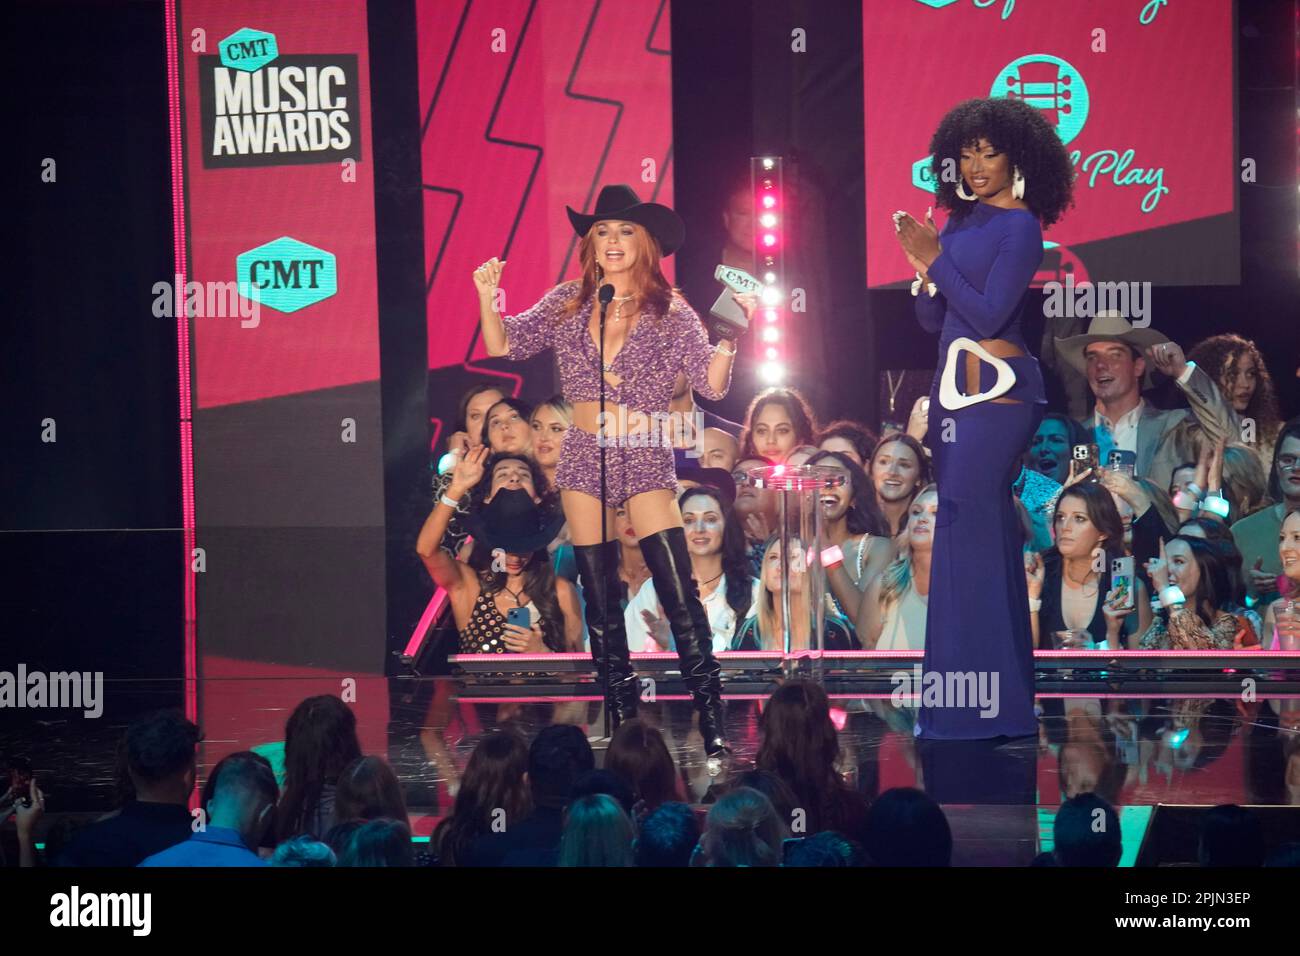 Country singer SHANIA TWAIN (l) accepts her award from presenter and rapper MEGAN THEE STALLION (r) onstage at the 2023 Country Music Awards (CMT) held for the first time in Austin, Texas on April 2, 2023 at the Moody Center before a sold out crowd. Credit: Bob Daemmrich/Alamy Live News Stock Photo